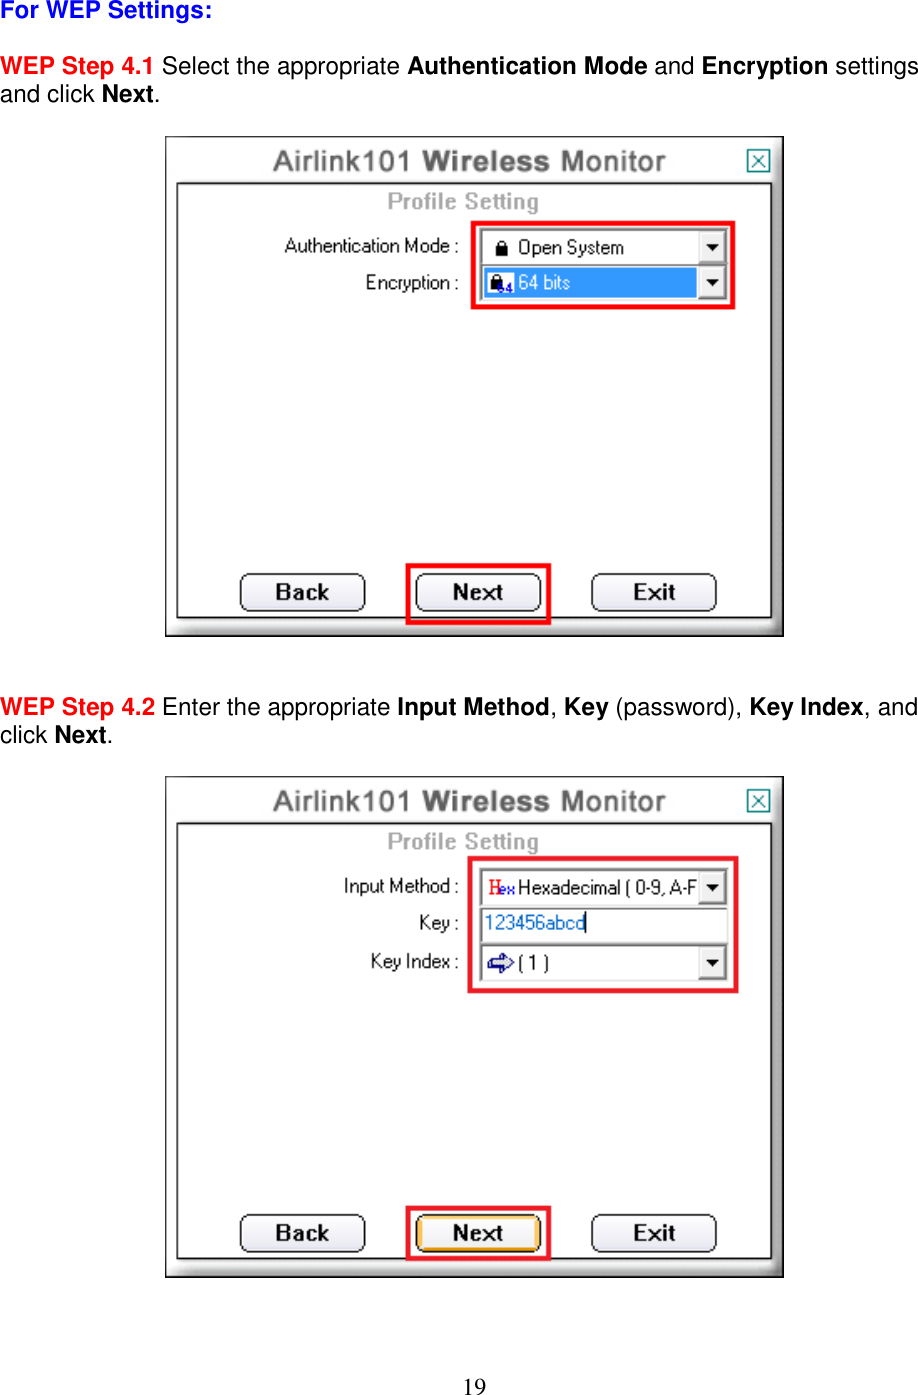 19 For WEP Settings:  WEP Step 4.1 Select the appropriate Authentication Mode and Encryption settings and click Next.     WEP Step 4.2 Enter the appropriate Input Method, Key (password), Key Index, and click Next.     